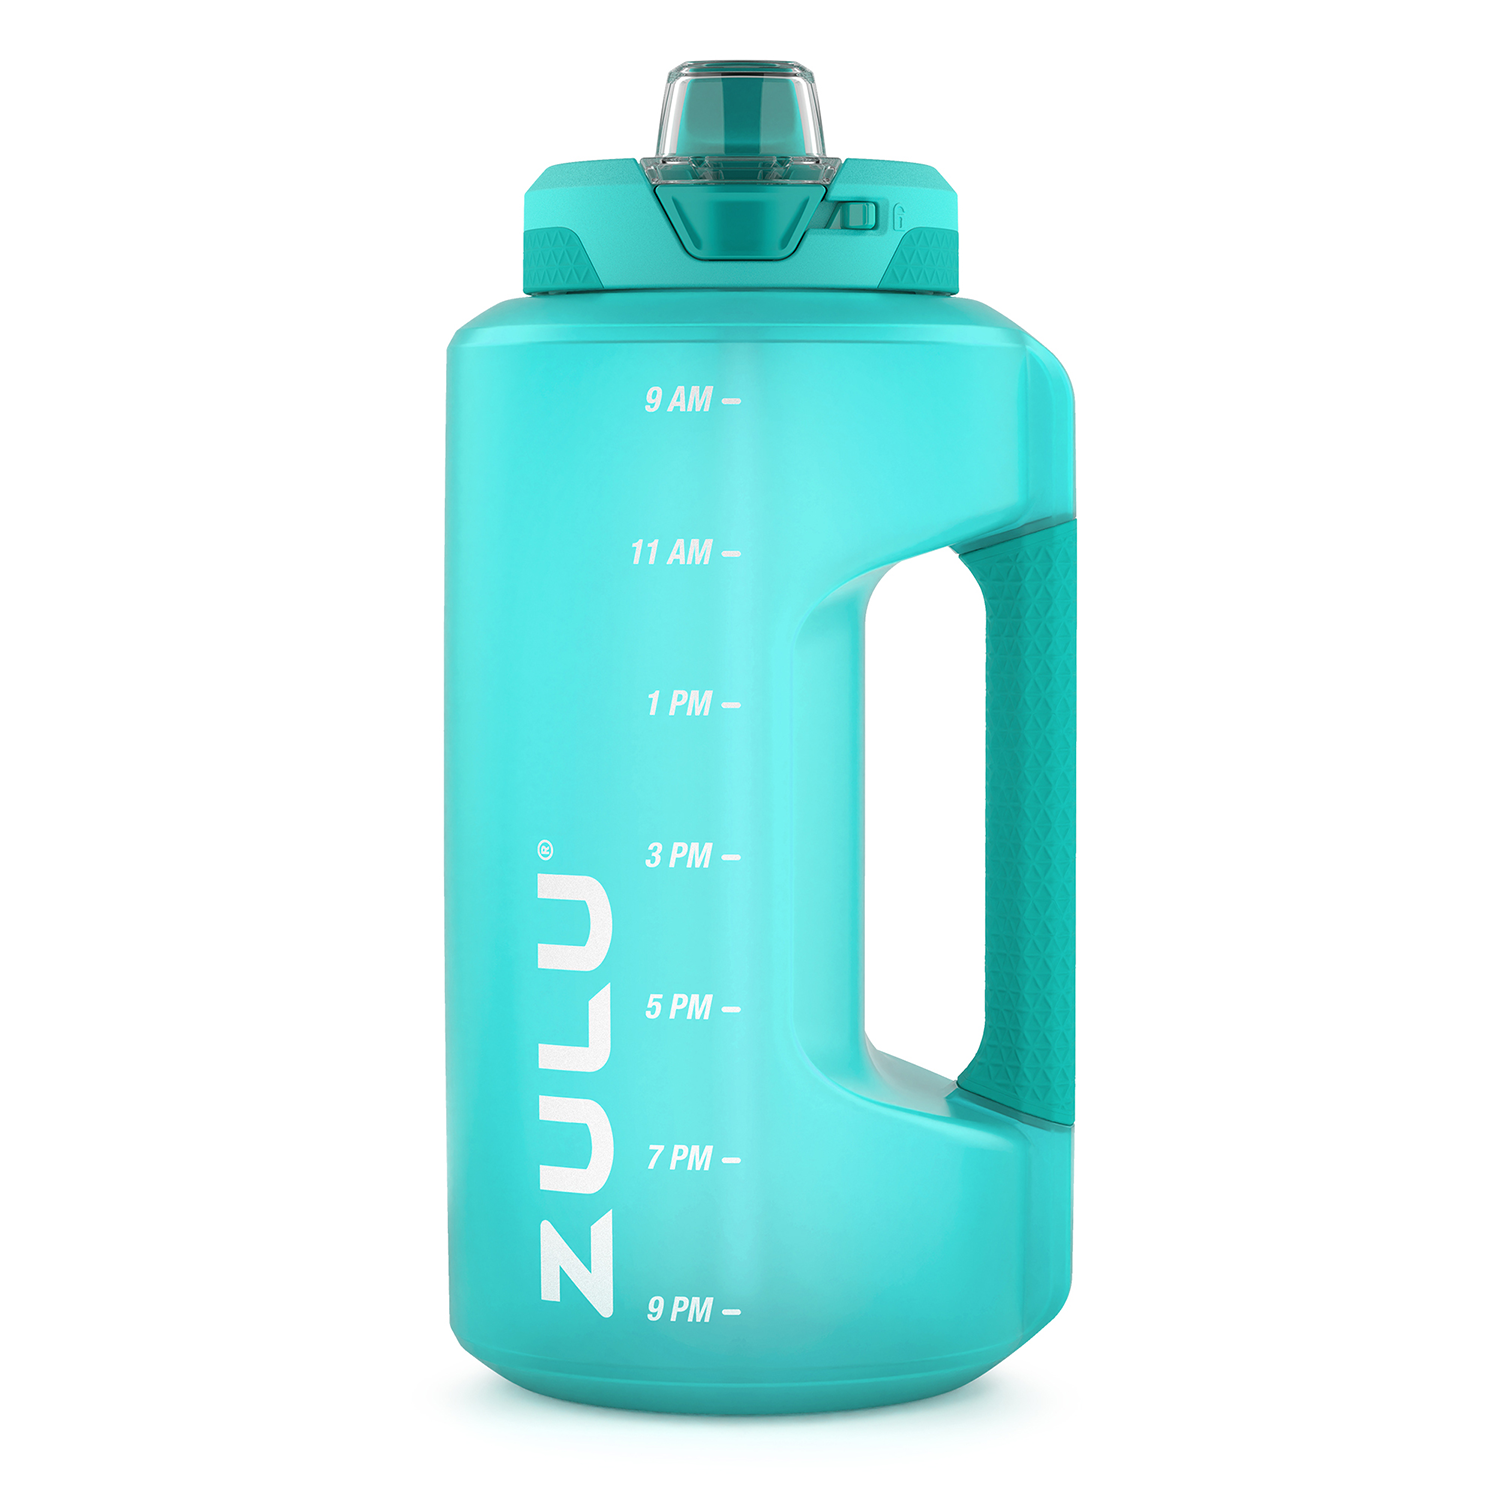  ZULU Goals 64oz Large Half Gallon Jug Water Bottle with  Motivational Time Marker, Covered Straw Spout and Carrying Handle, Perfect  for Gym, Home, and Sports, Royal Blue : Sports 